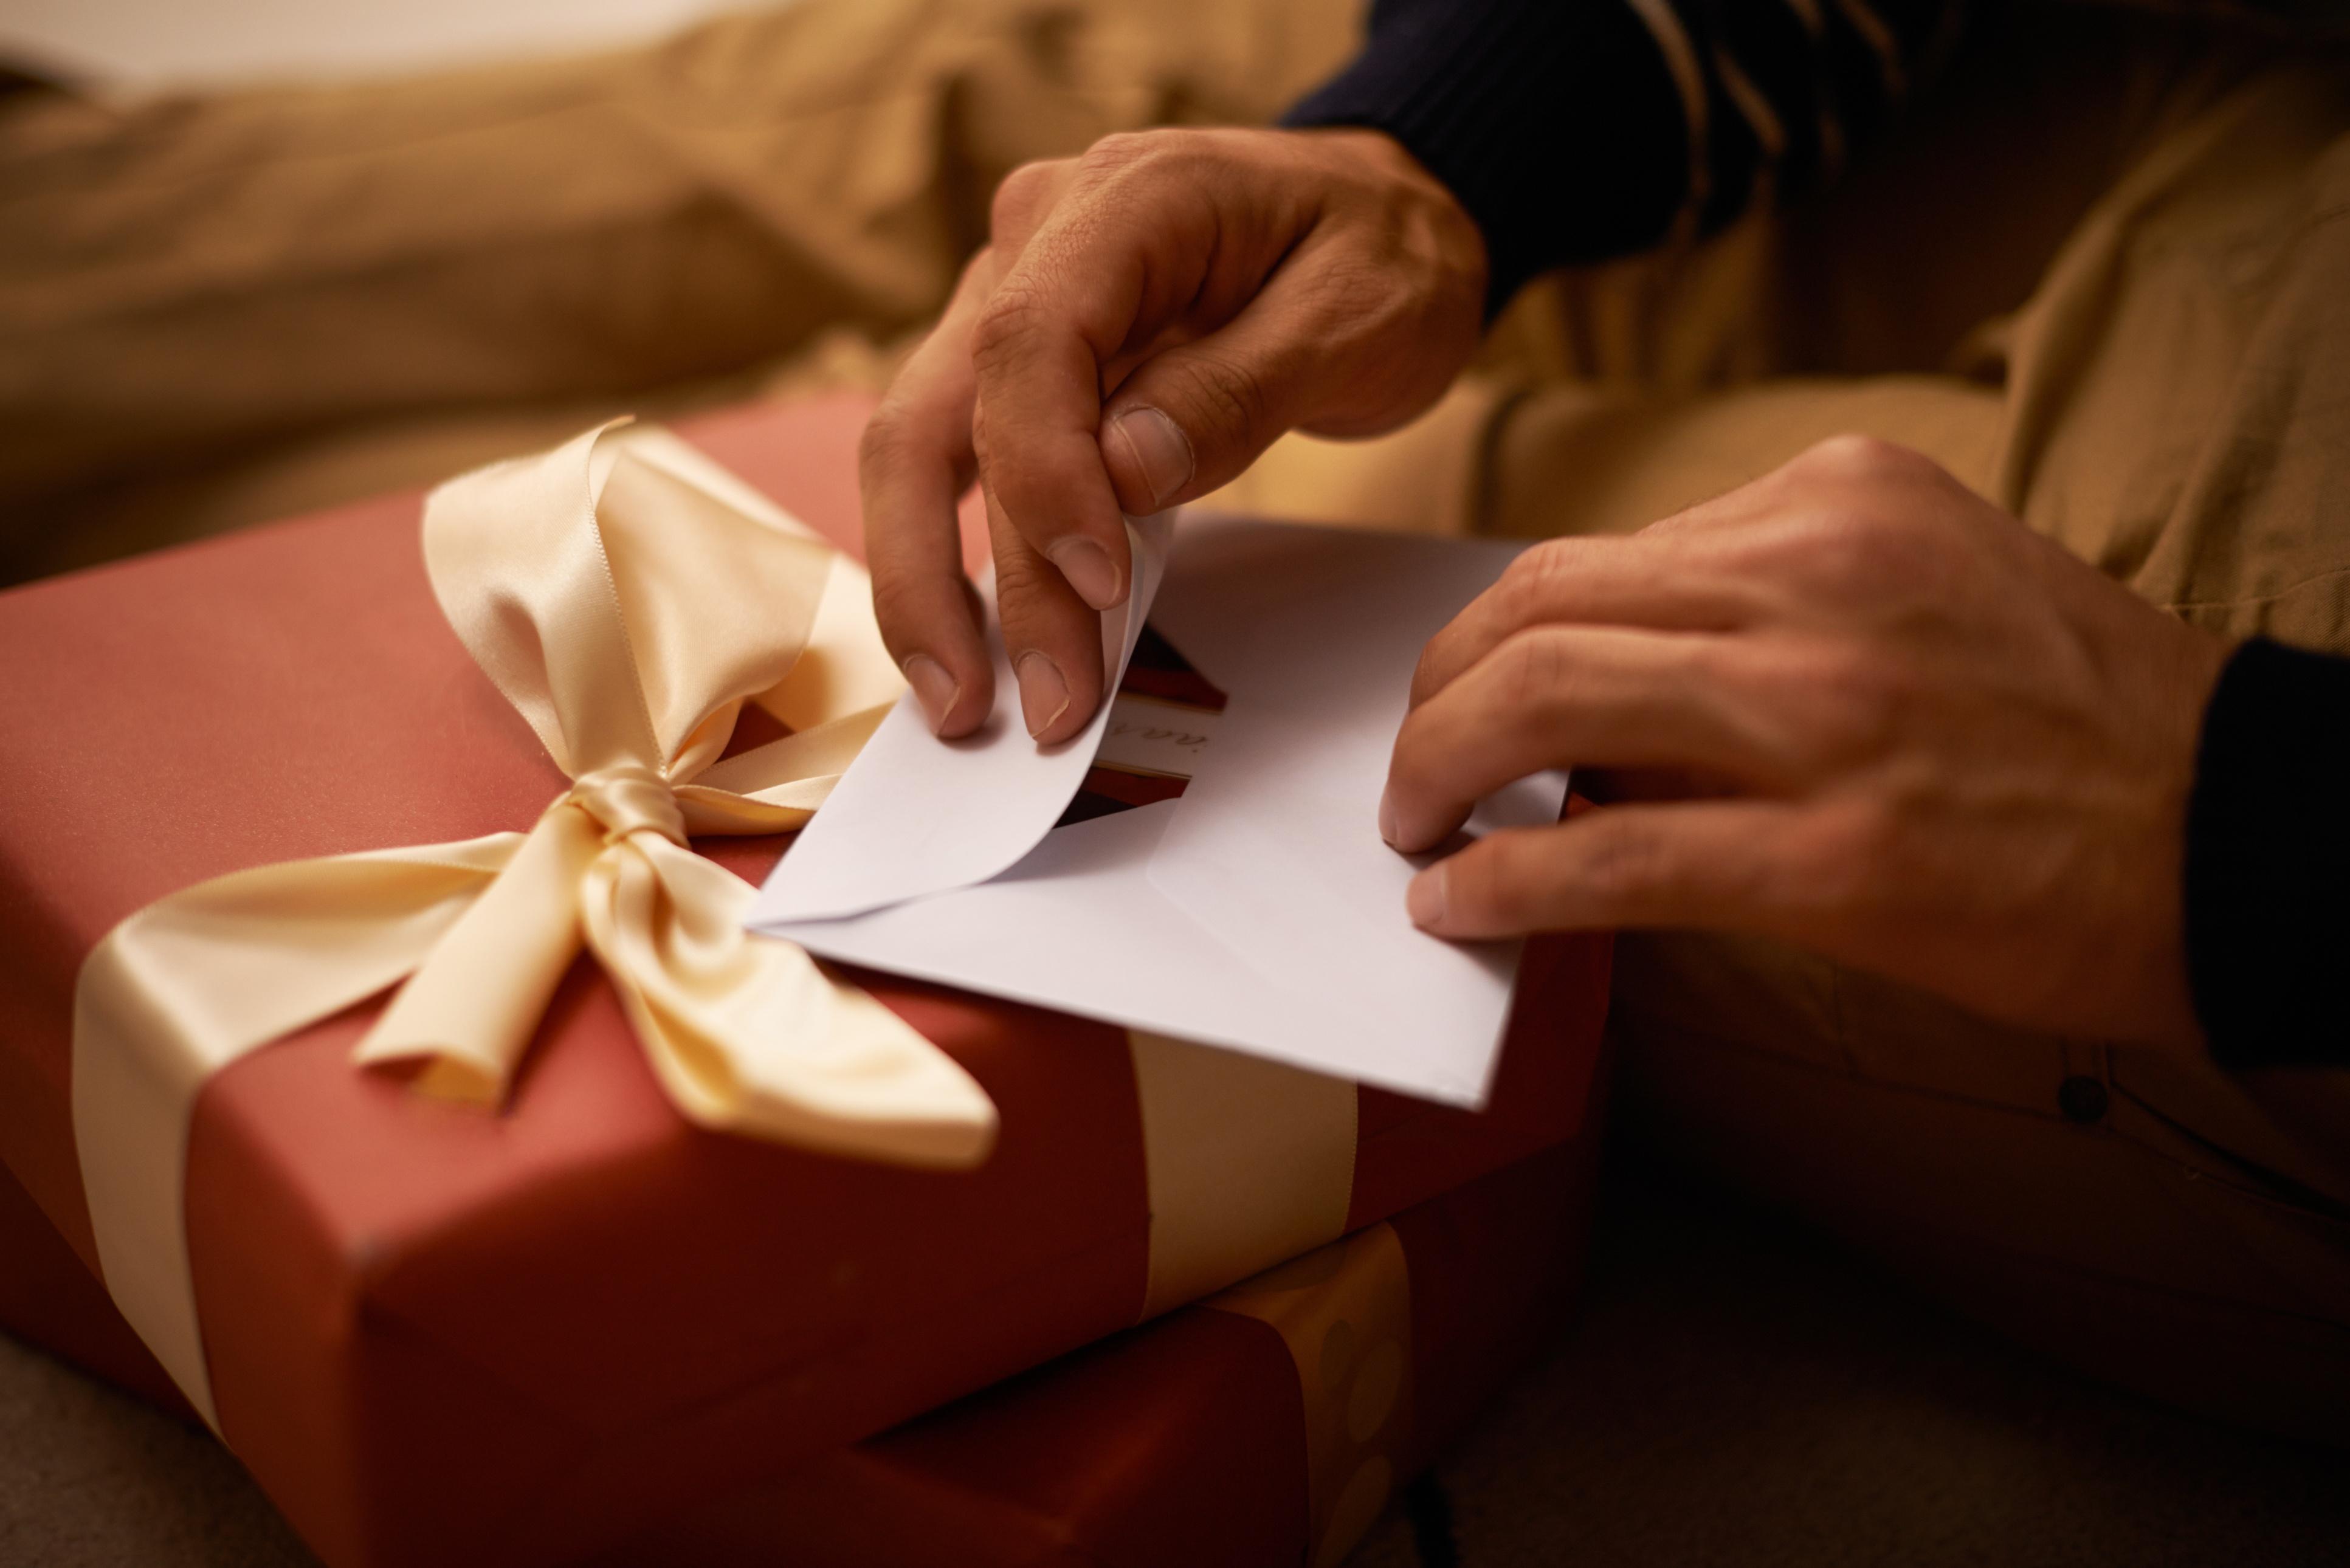 10 Top Marketers Share the Best Gifts They Ever Received